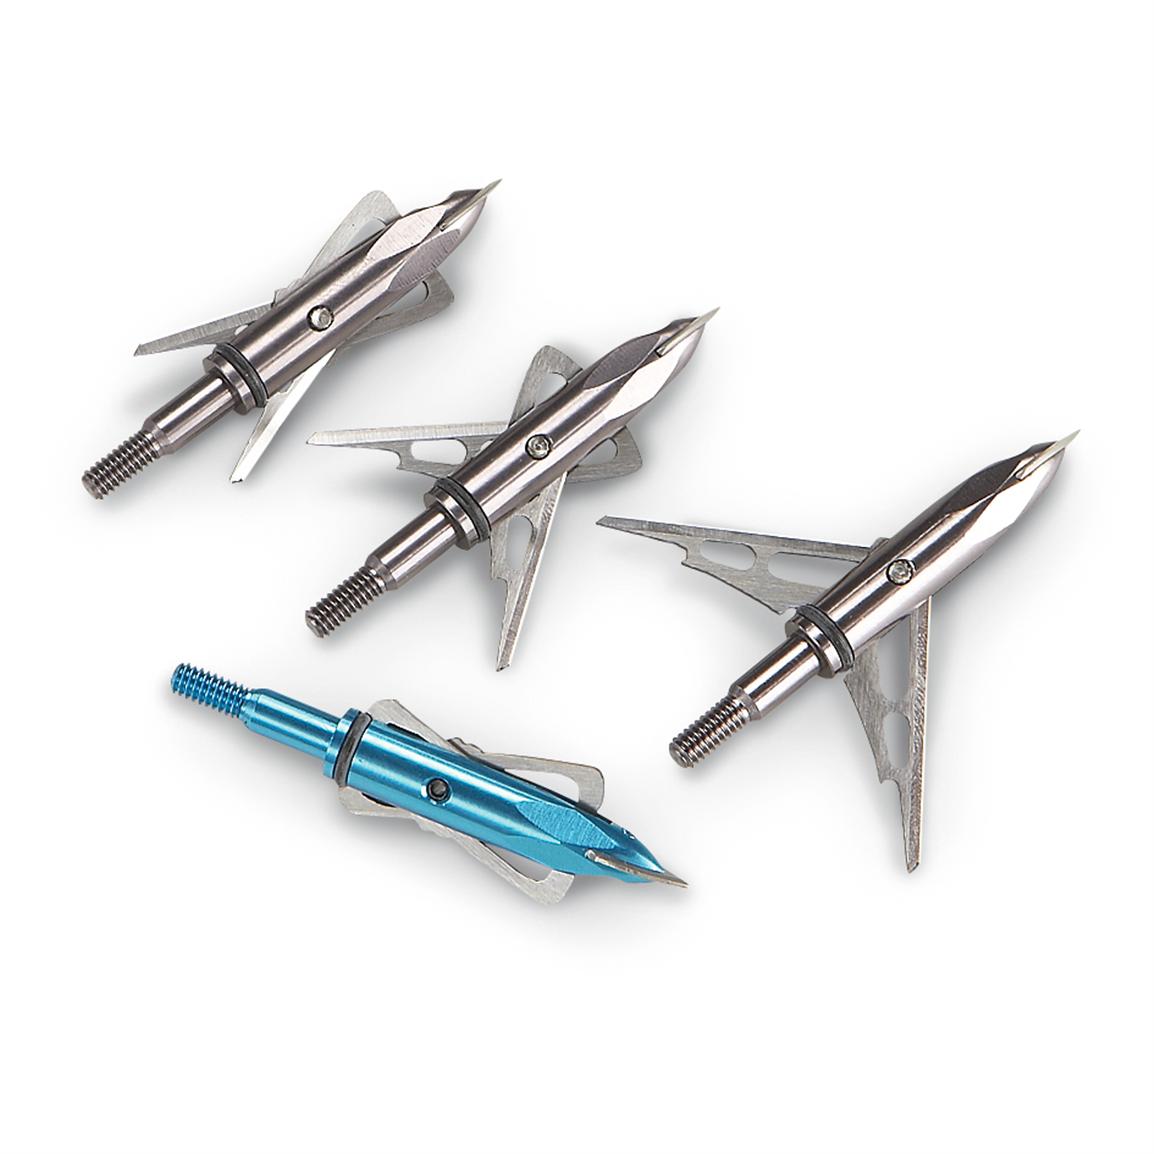 3 Pk Of Rage® Chisel Point 2 Blade Broadhead 293087 Broadheads And Points At Sportsmans Guide 7205